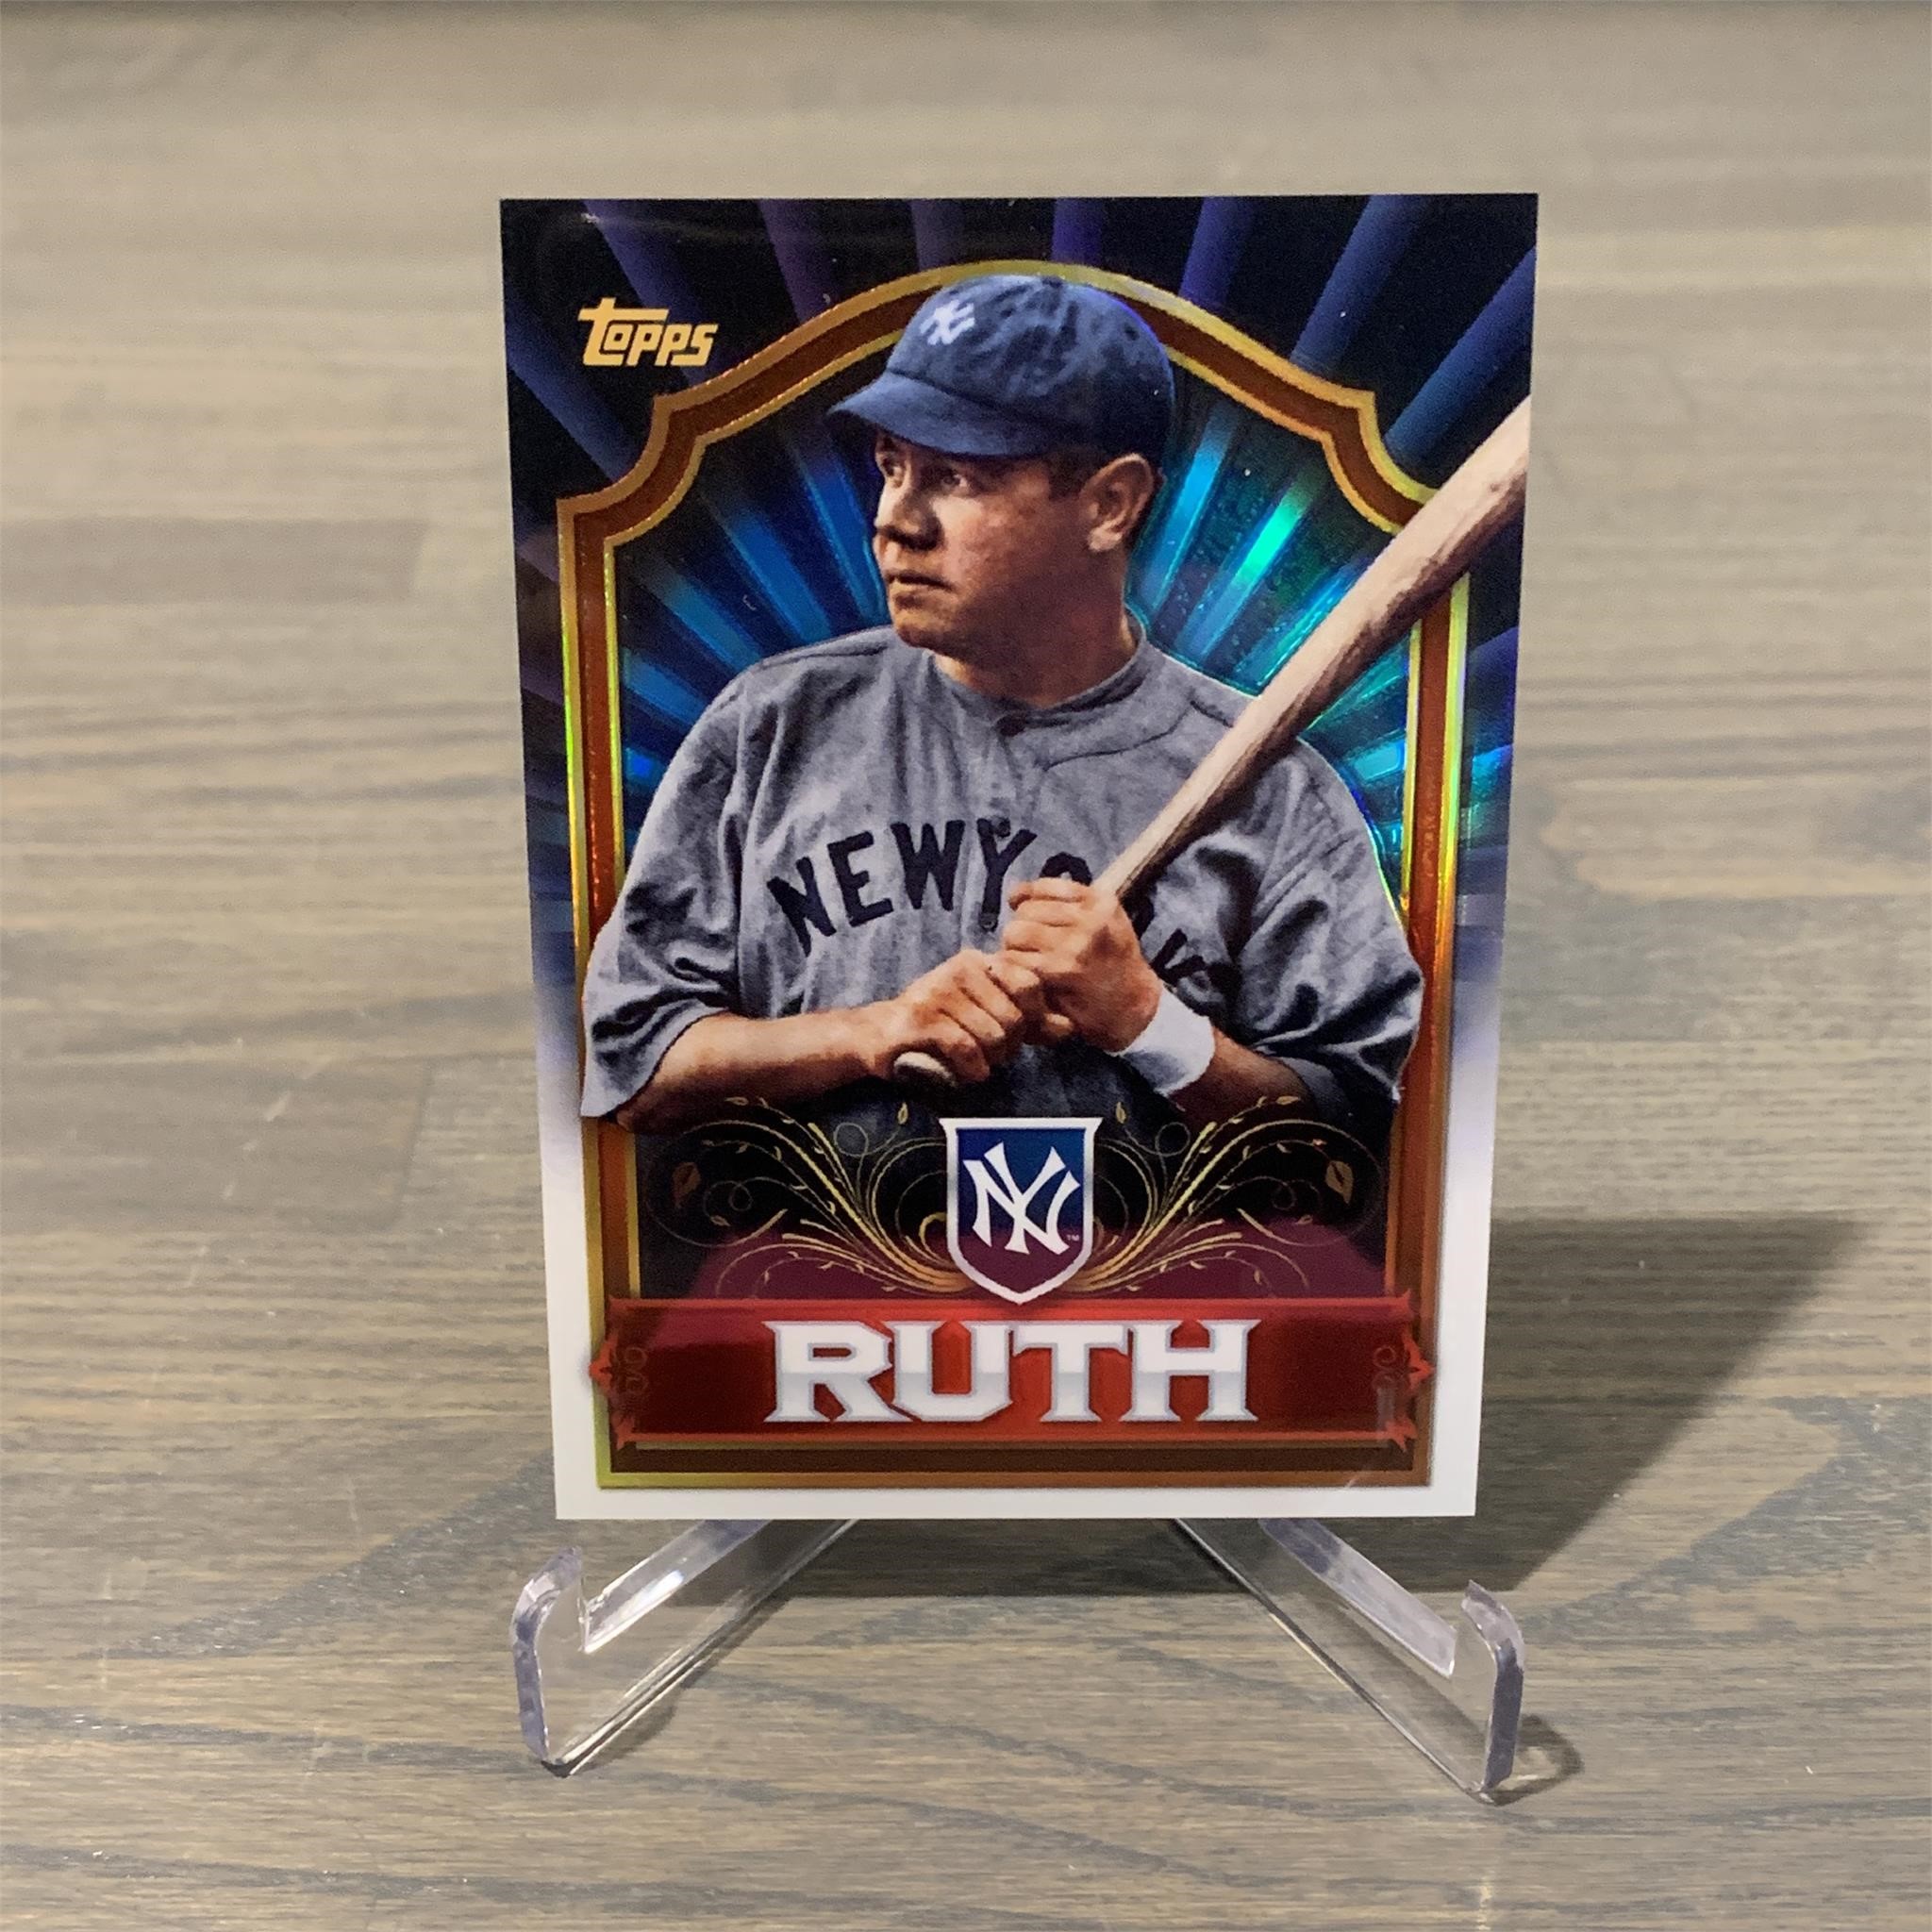 Babe Ruth Topps Refractor Card